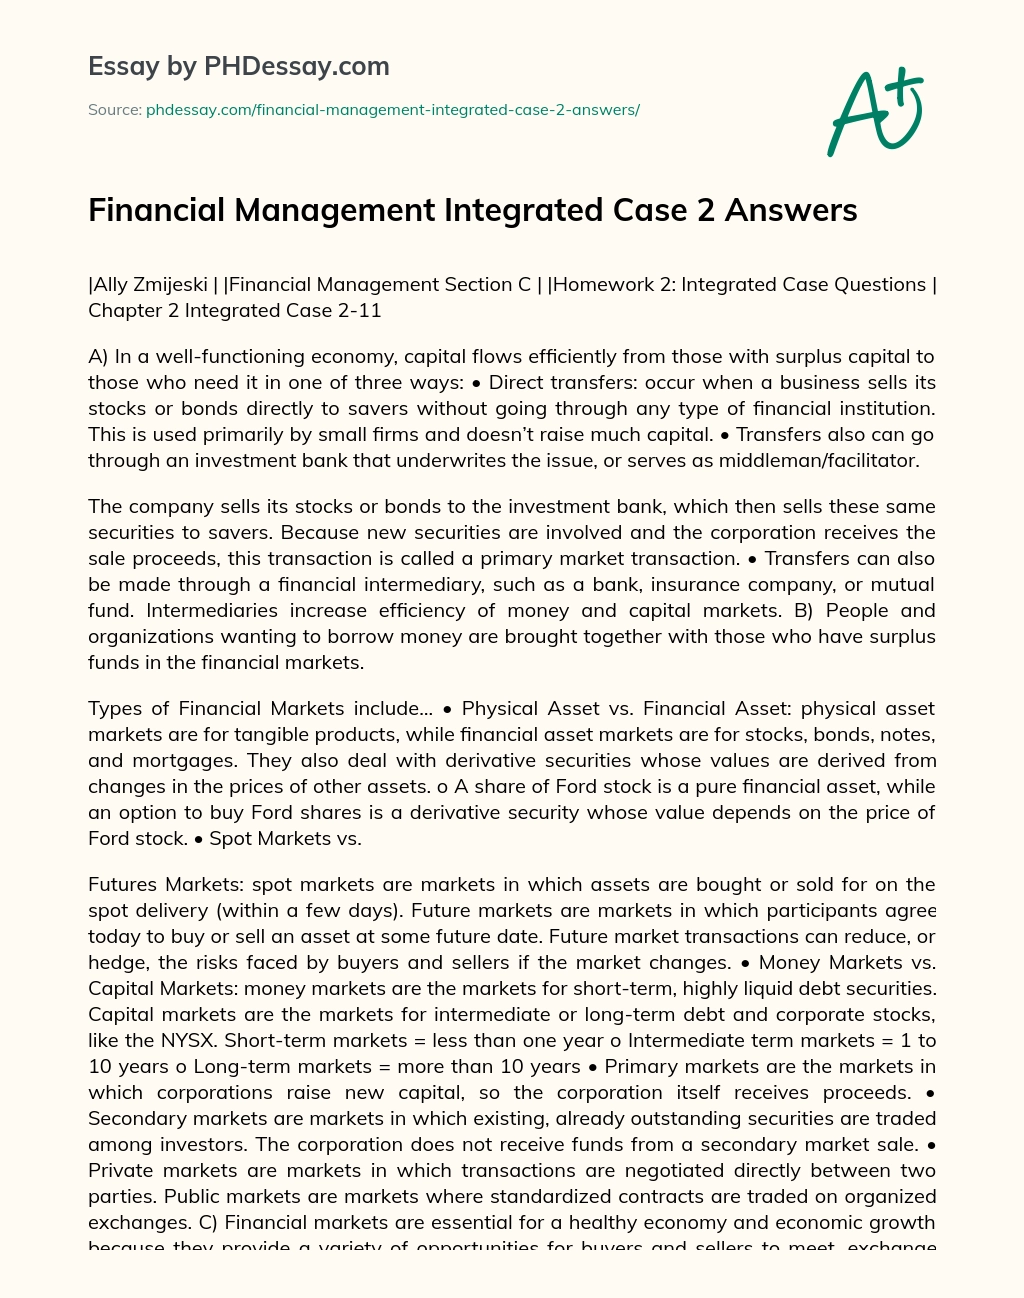 Financial Management Integrated Case 2 Answers essay